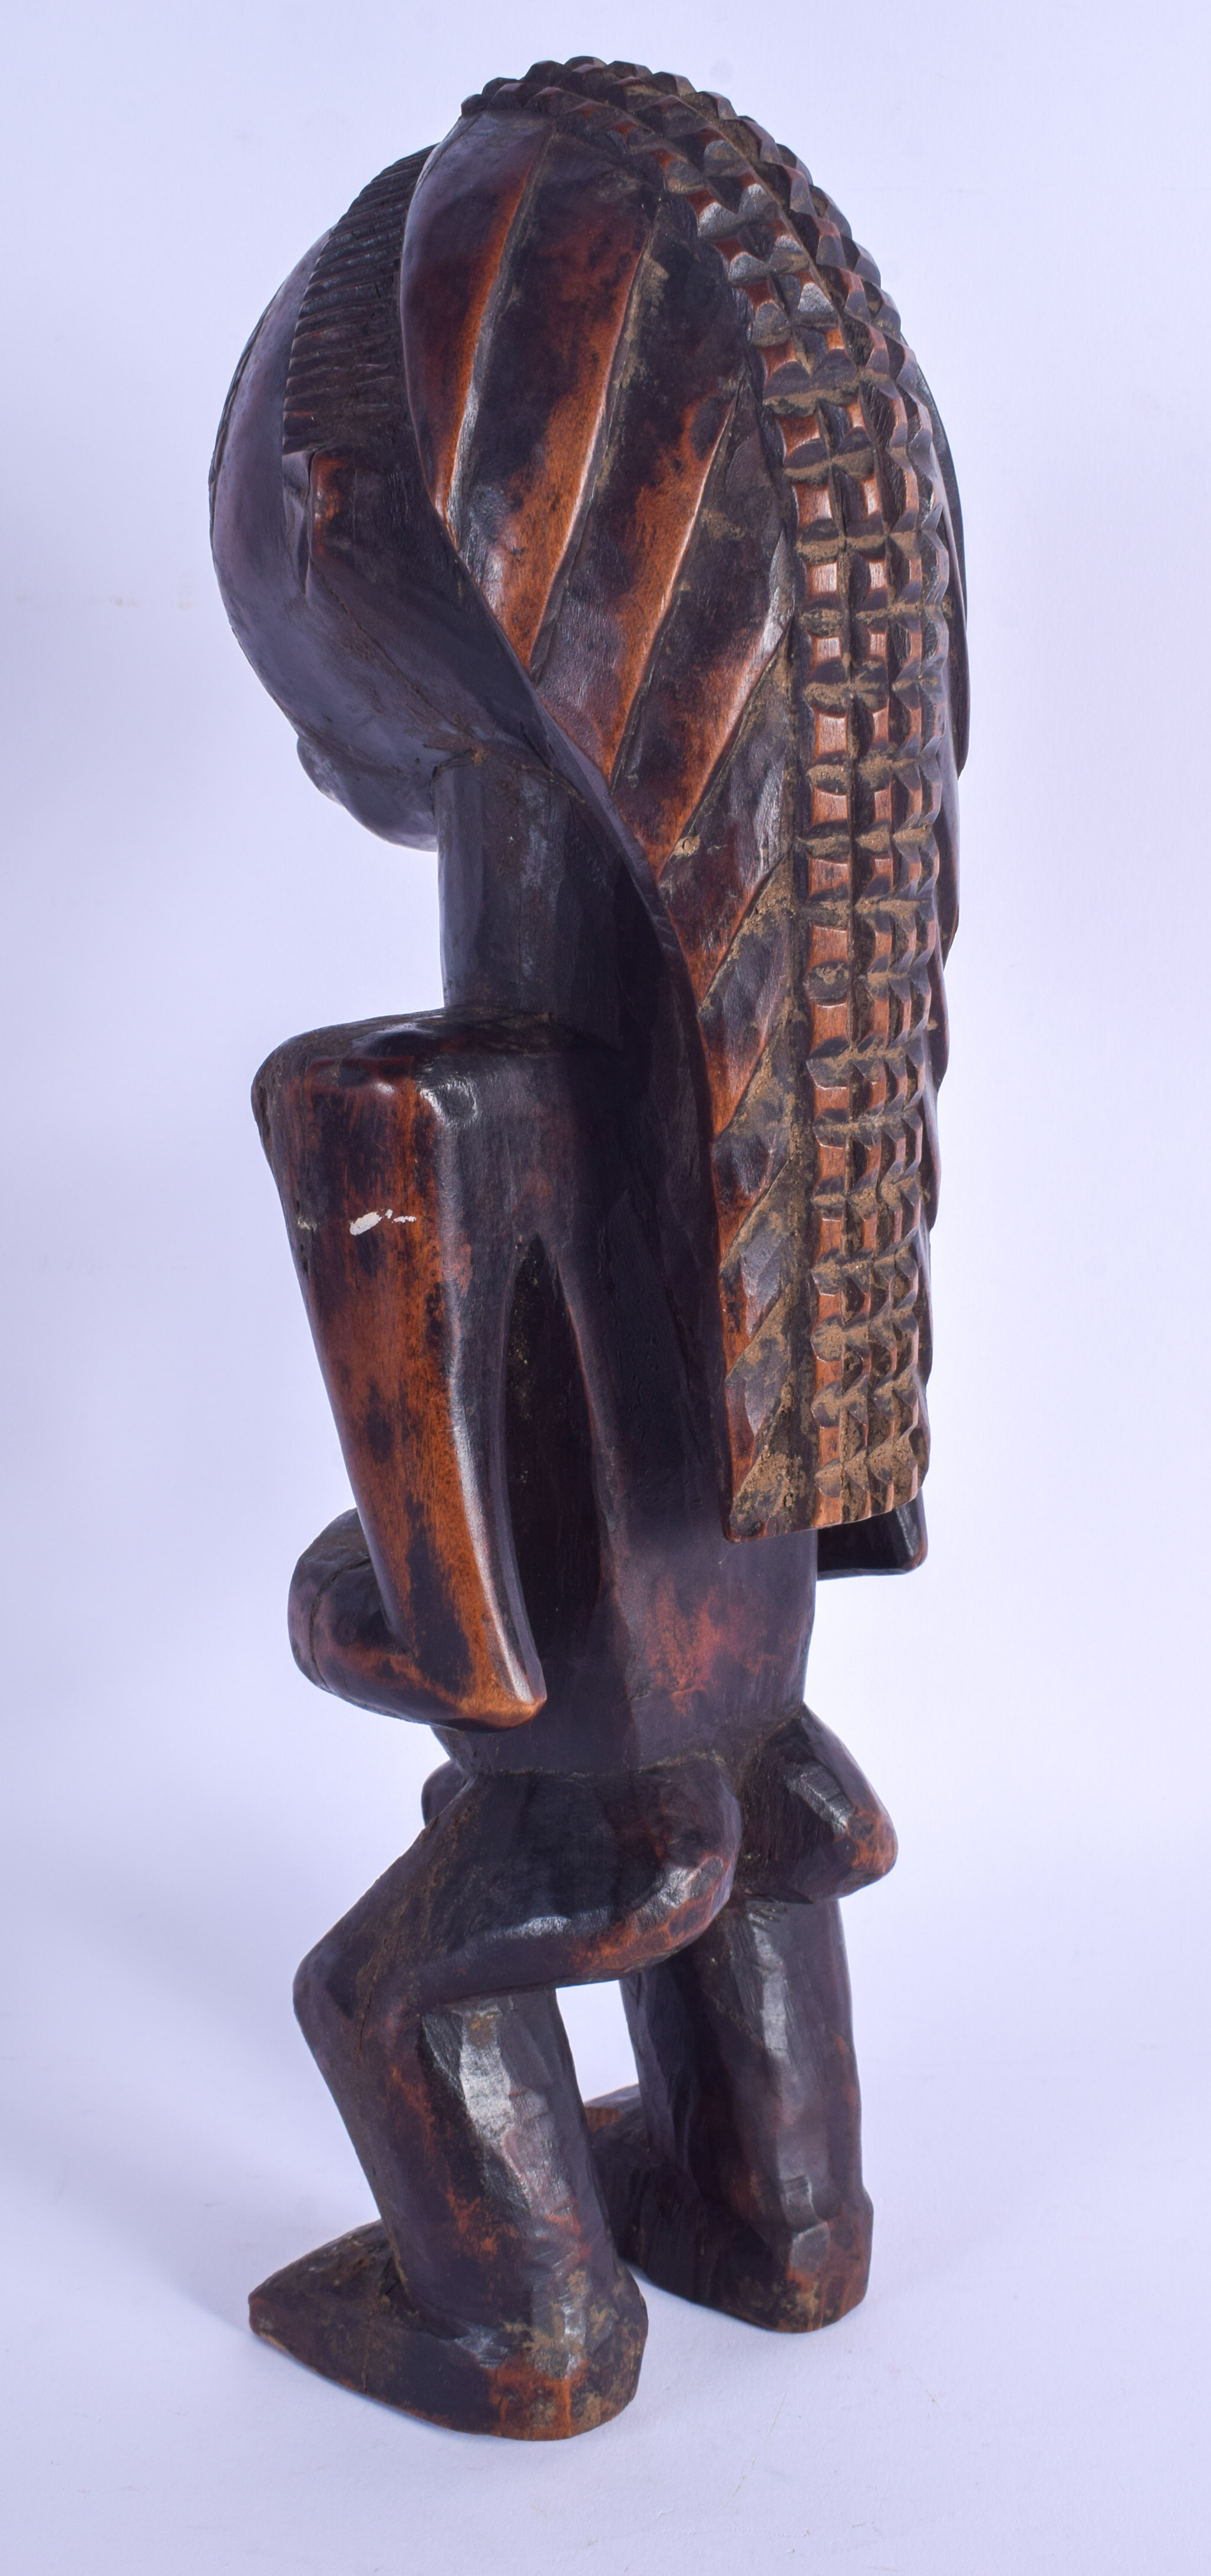 AN UNUSUAL AFRICAN TRIBAL CARVED WOOD LUBA FIGURE modelled with braided hair. 33 cm high. - Image 3 of 4